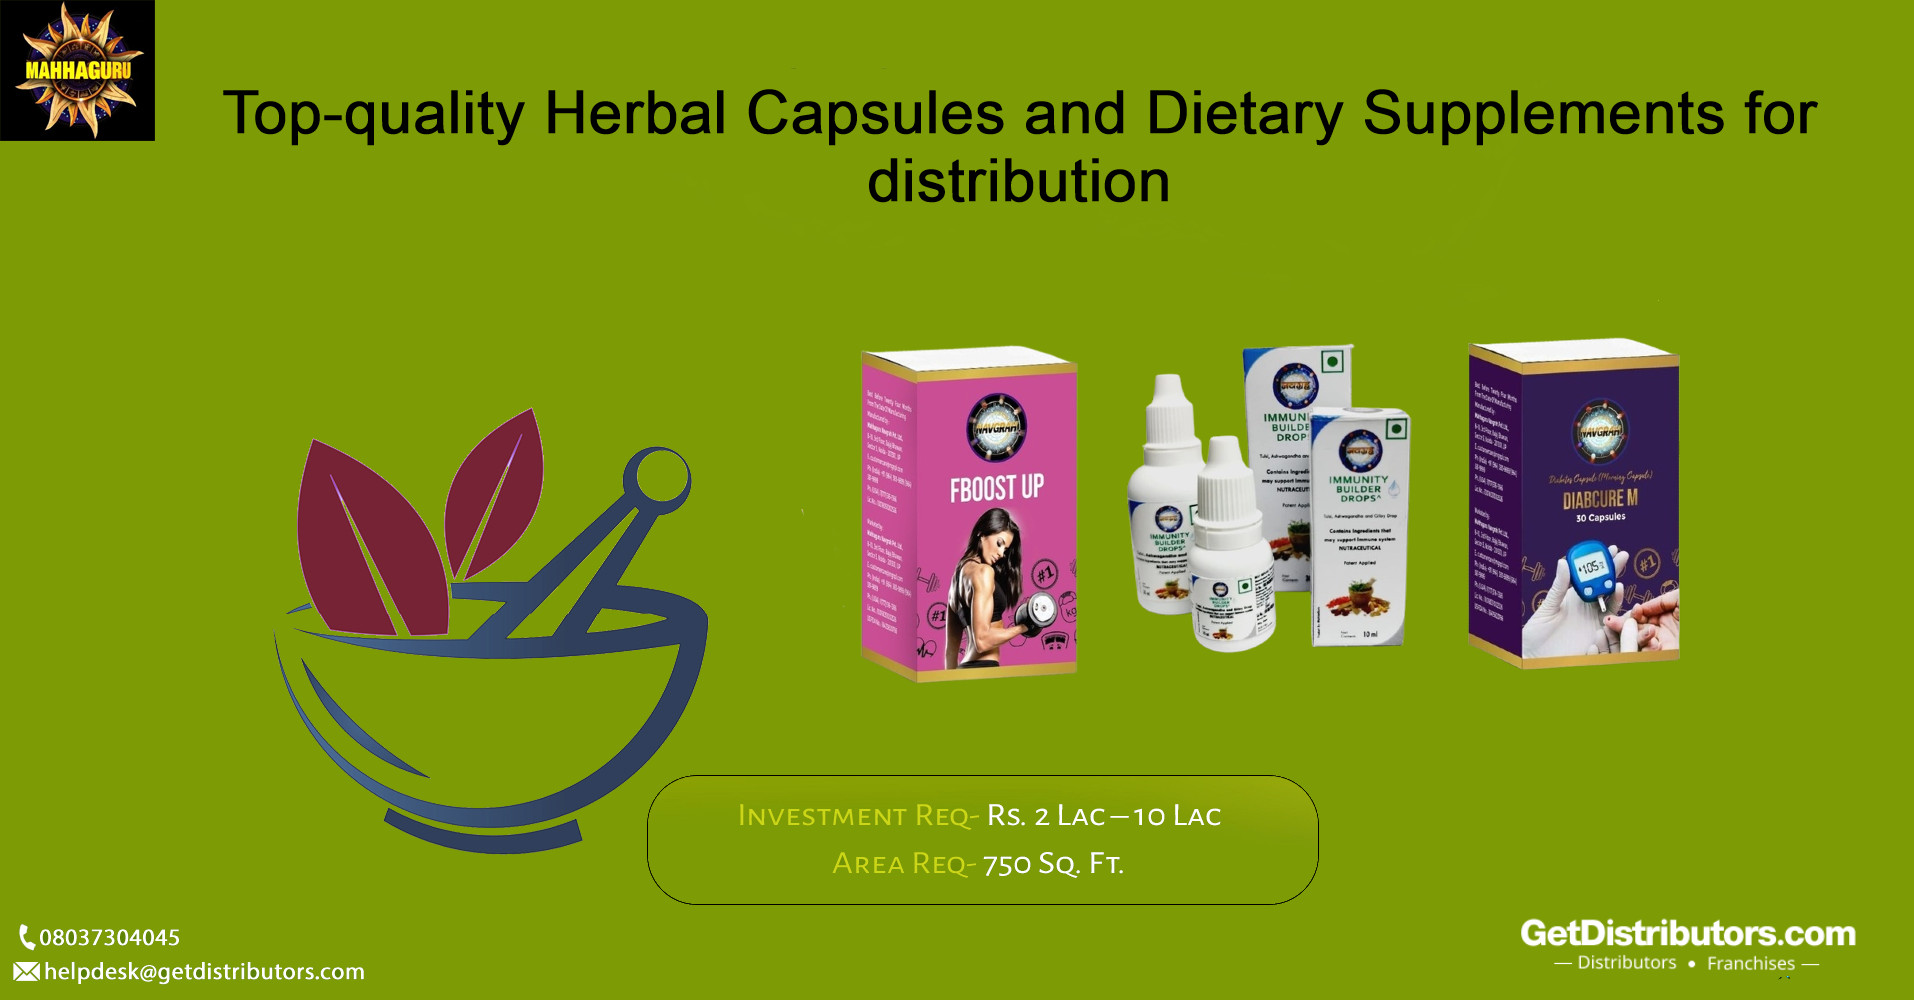 Top-quality Herbal Capsules and Dietary Supplements for distribution